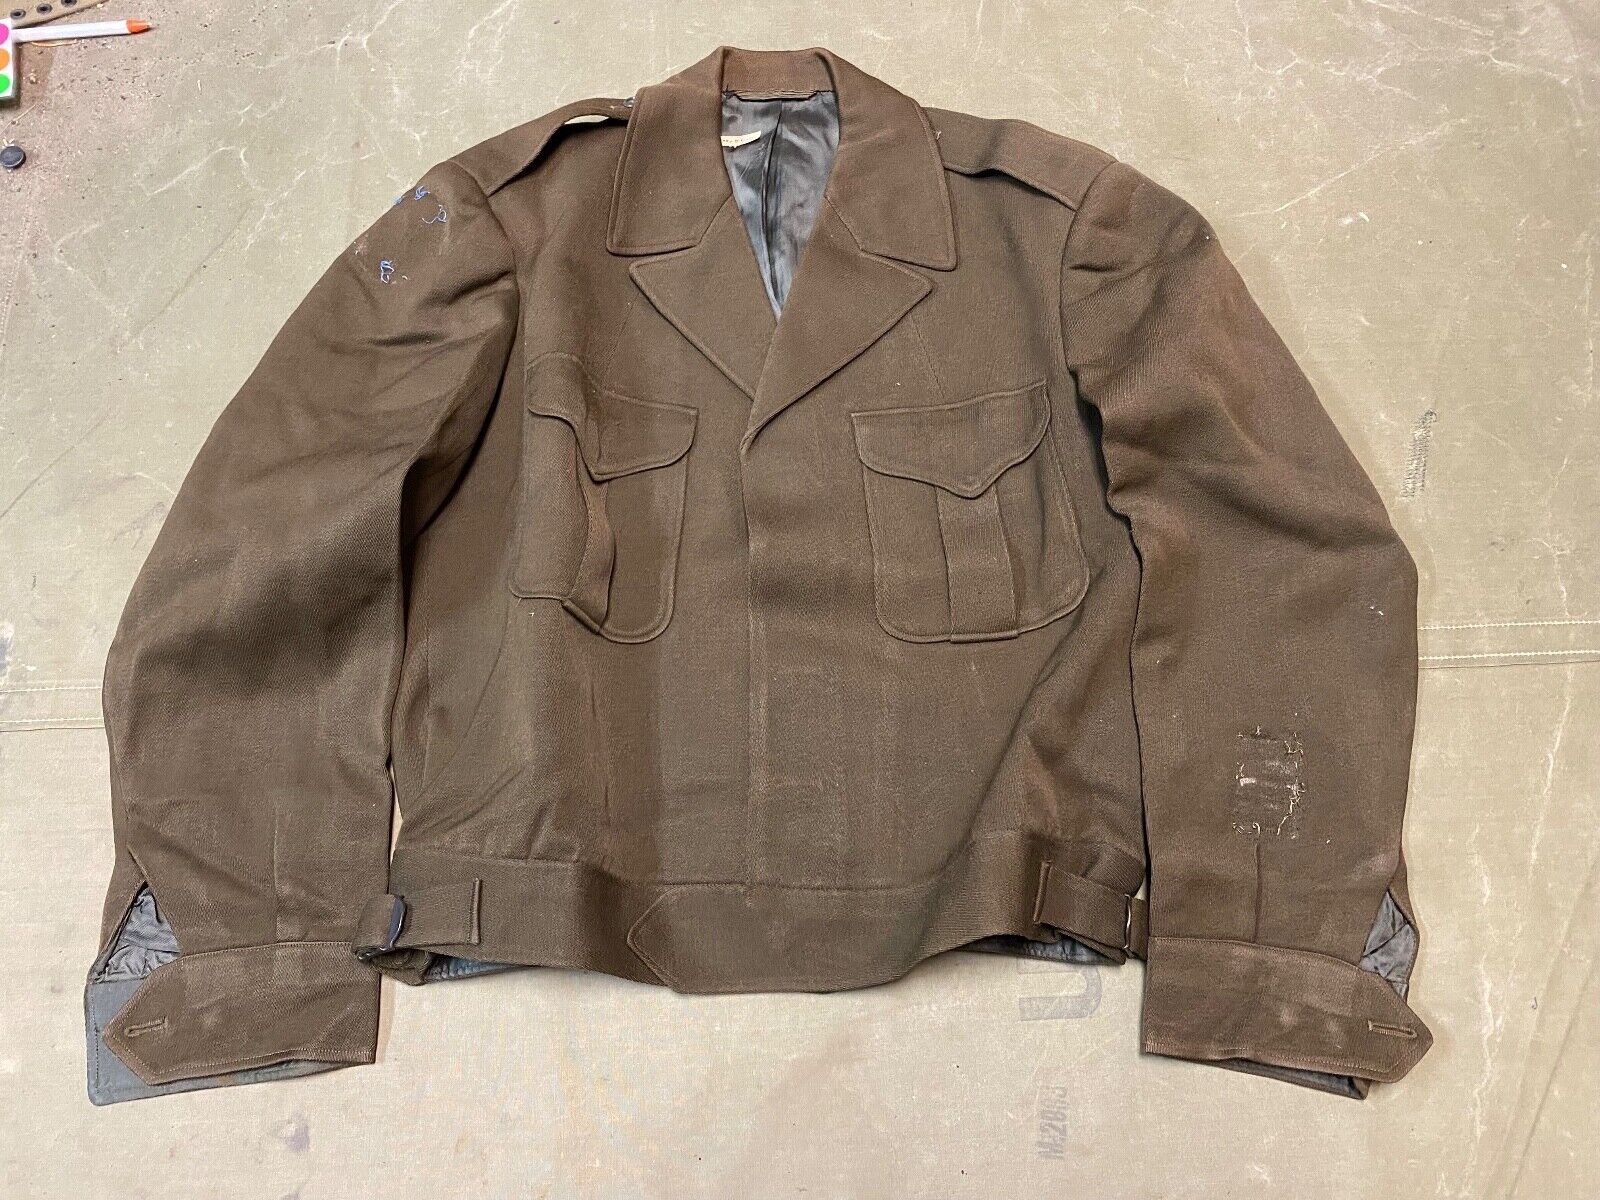 ORIGINAL WWII US ARMY OFFICER M1944 CLASS A IKE JACKET- MEDIUM/LARGE 42R